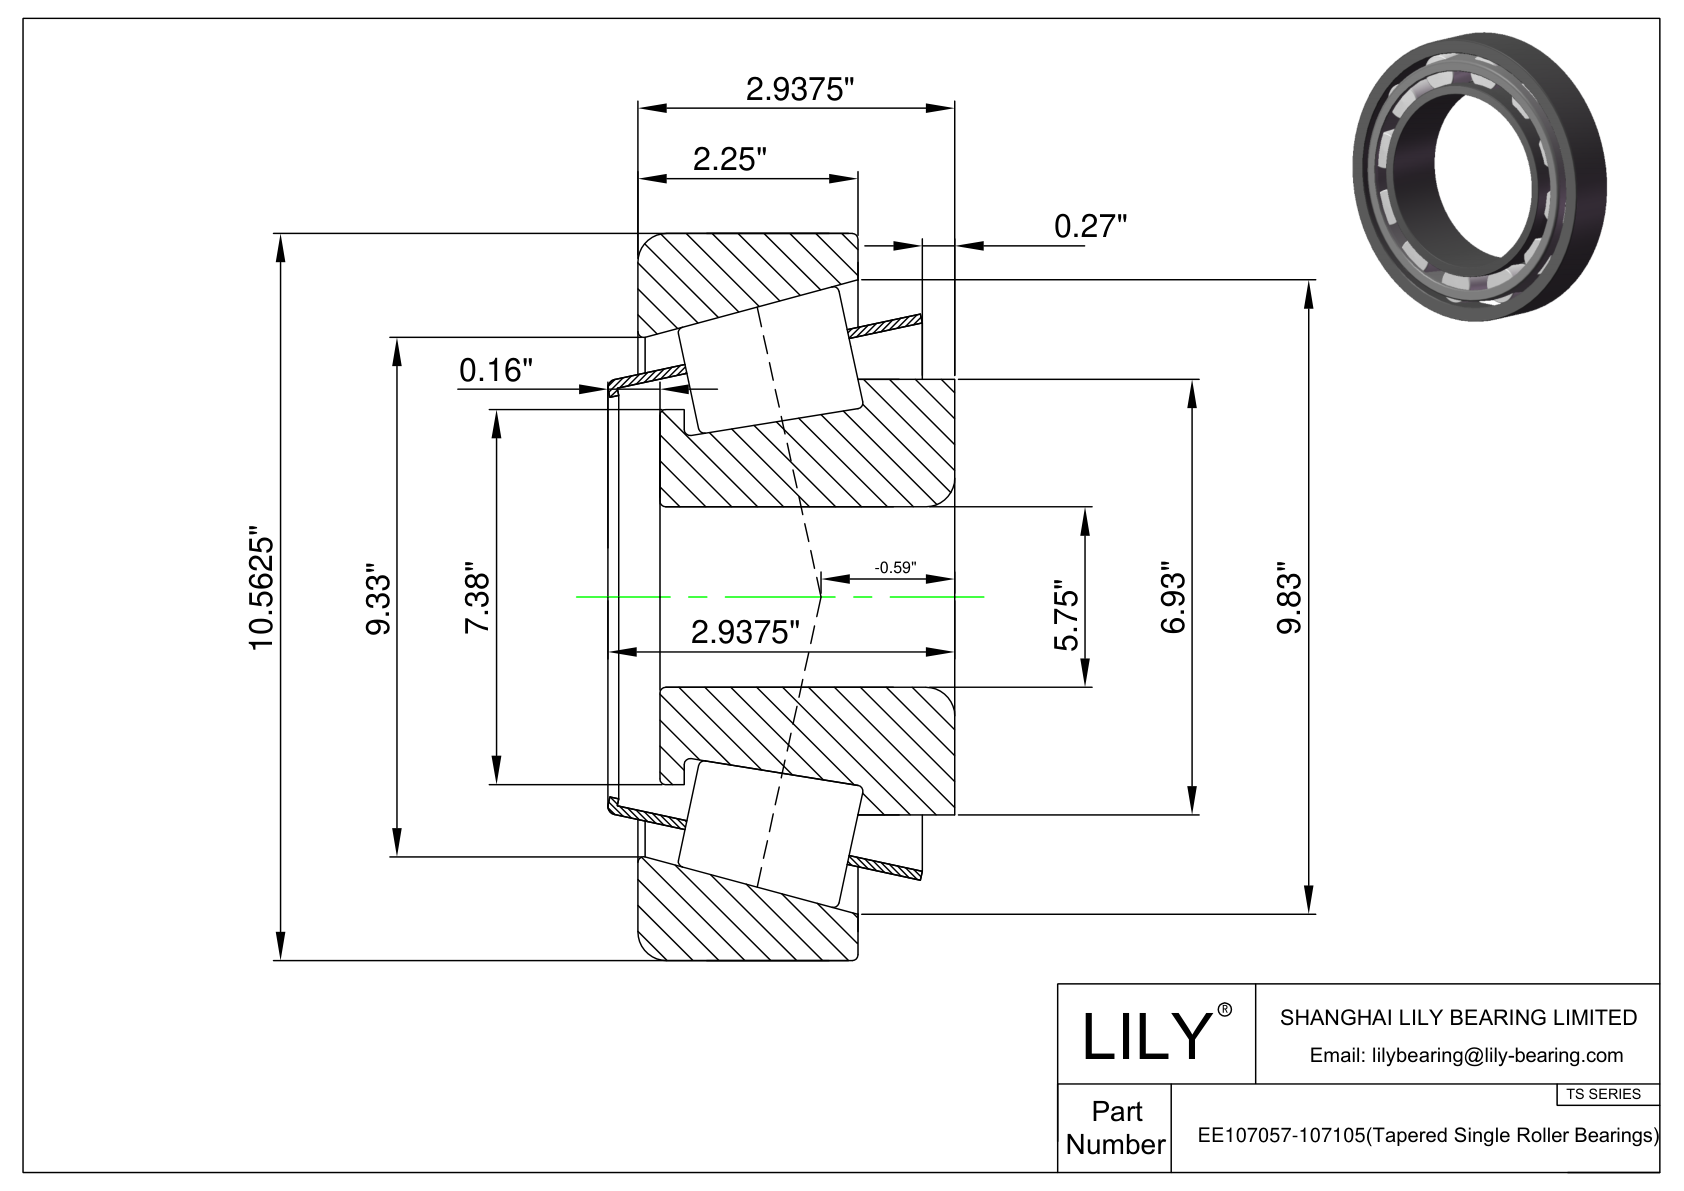 EE107057-107105 TS (Tapered Single Roller Bearings) (Imperial) cad drawing